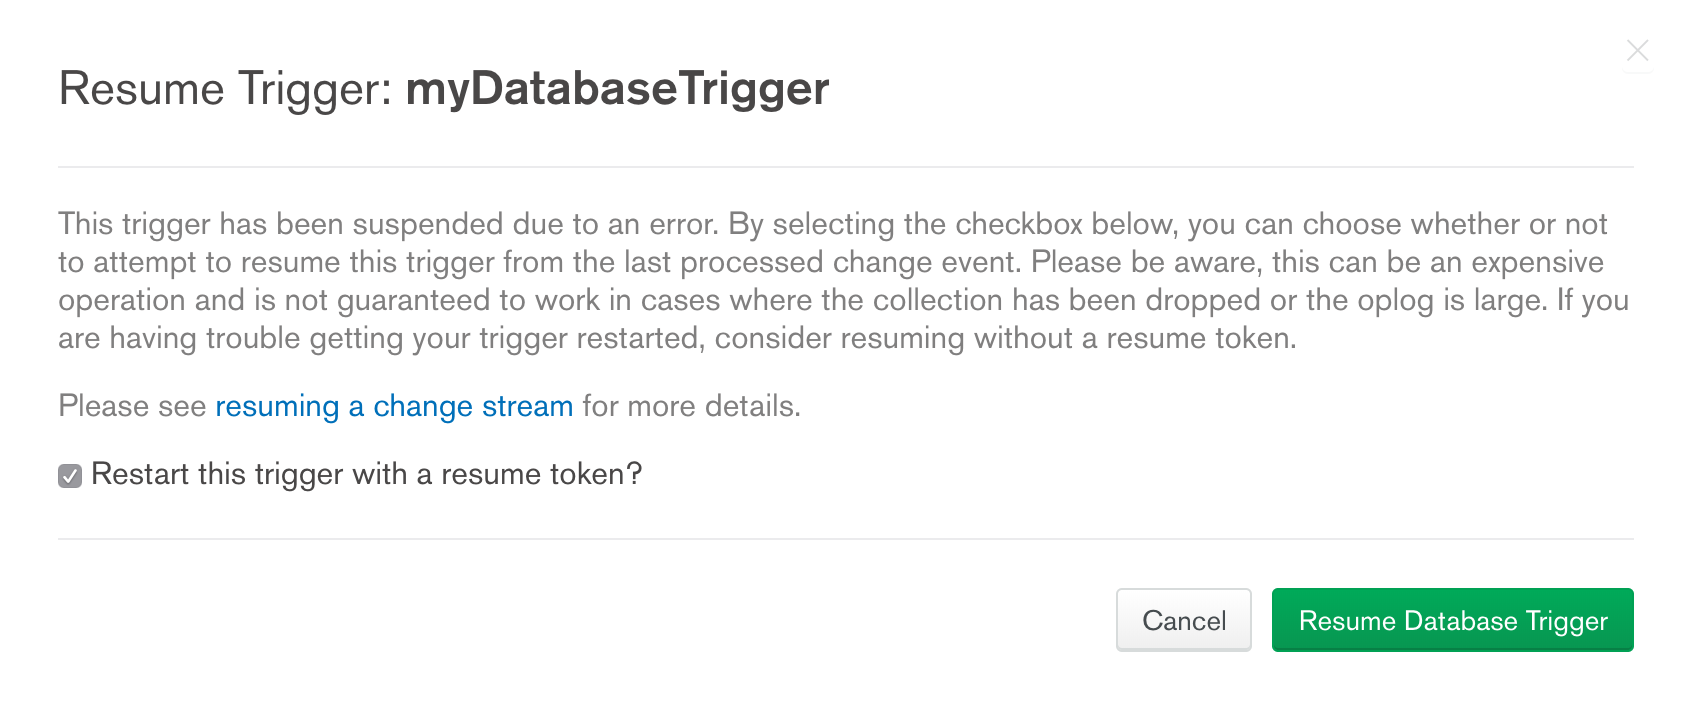 Select the checkbox to restart a trigger with a resume token.